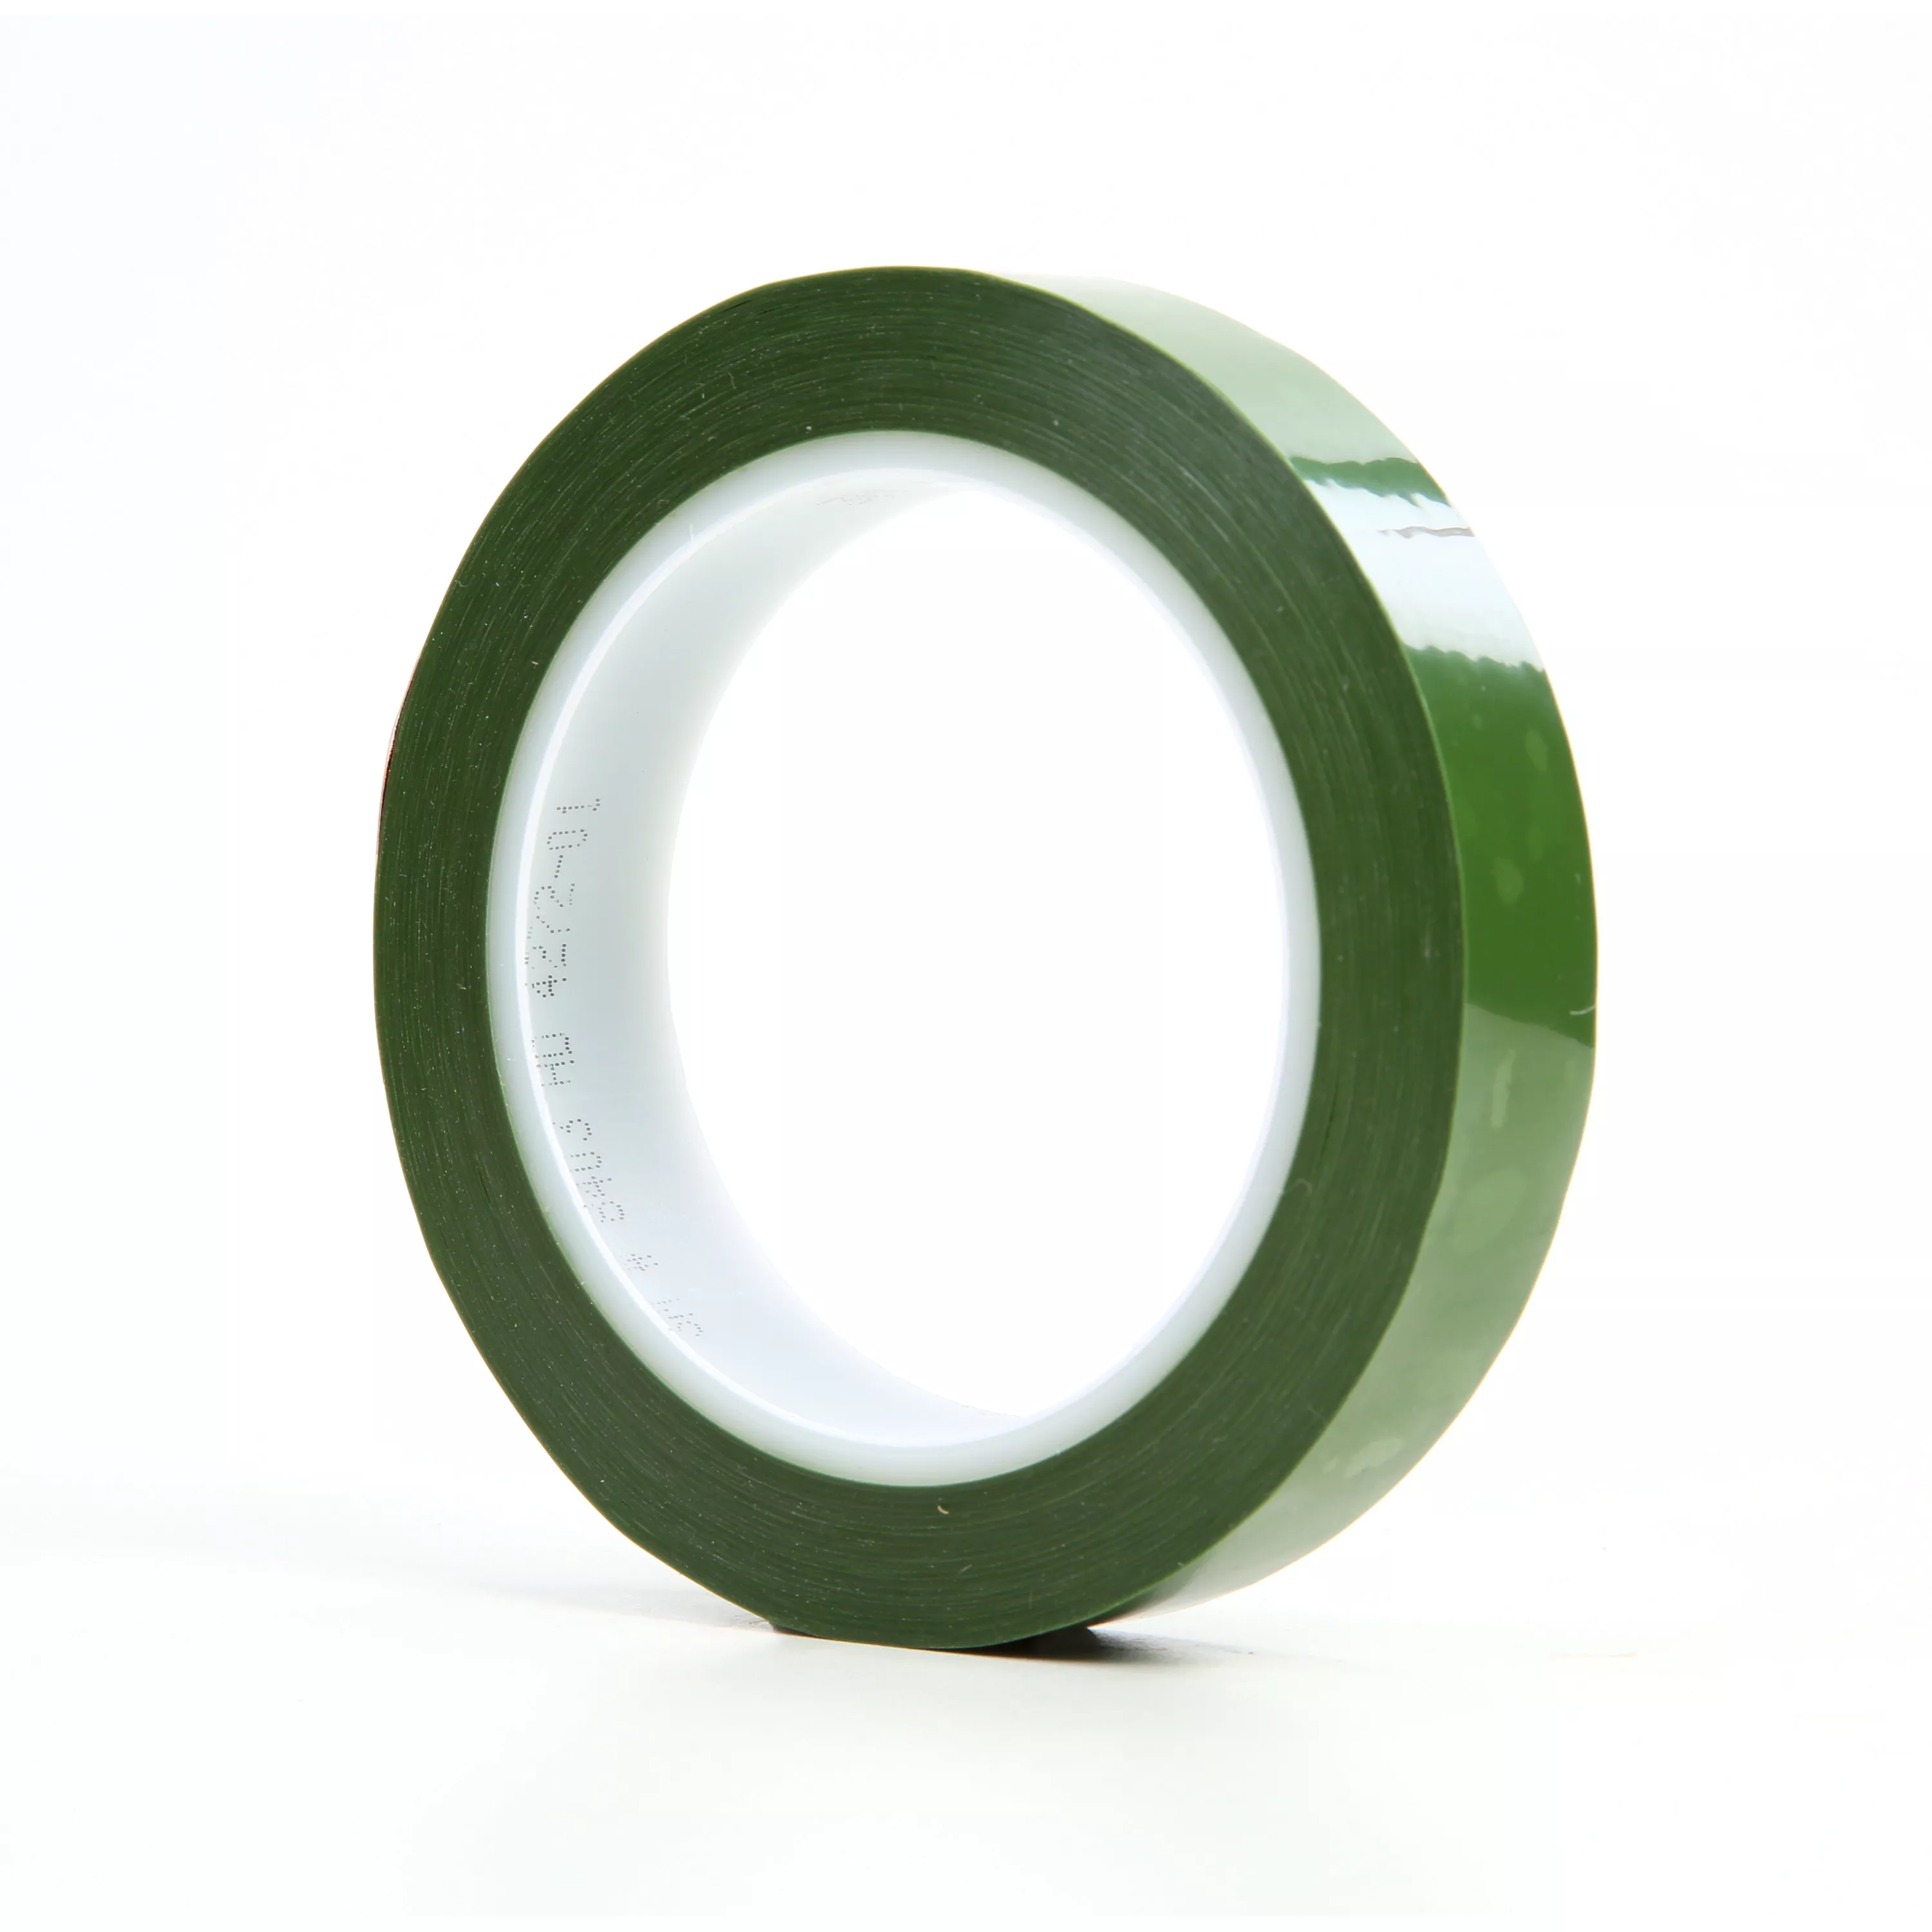 3M™ Polyester Tape 8403, Green, 3/4 in x 72 yd, 2.4 mil, 48 rolls per
case